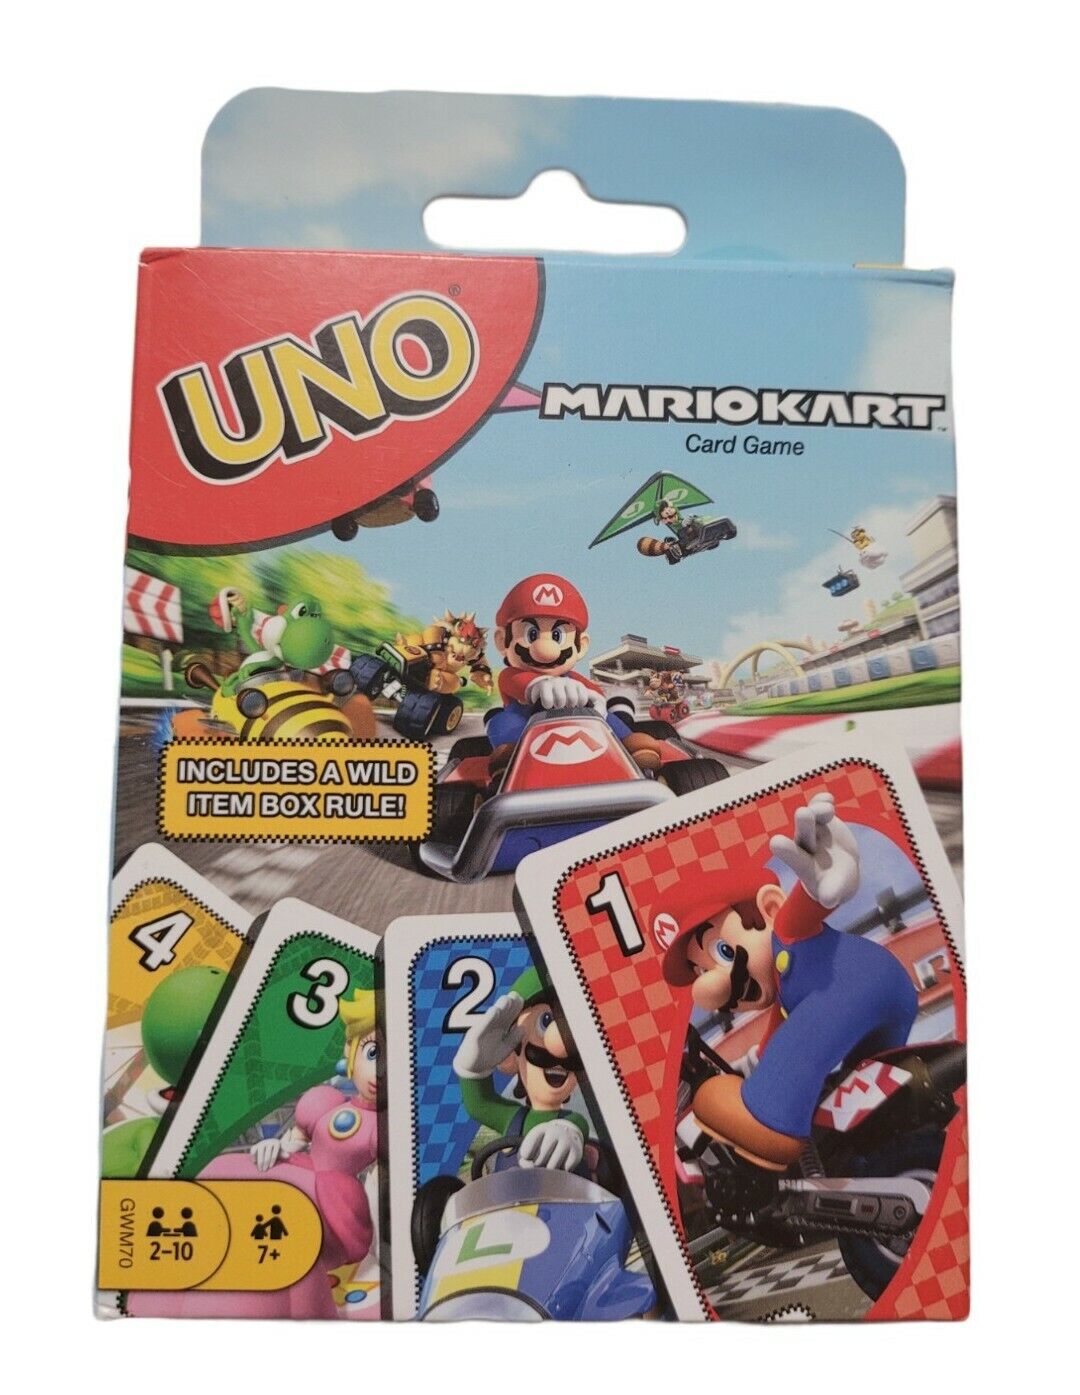 Mattel Games UNO Mario Kart Card Game with 112 Cards & Instructions for... 